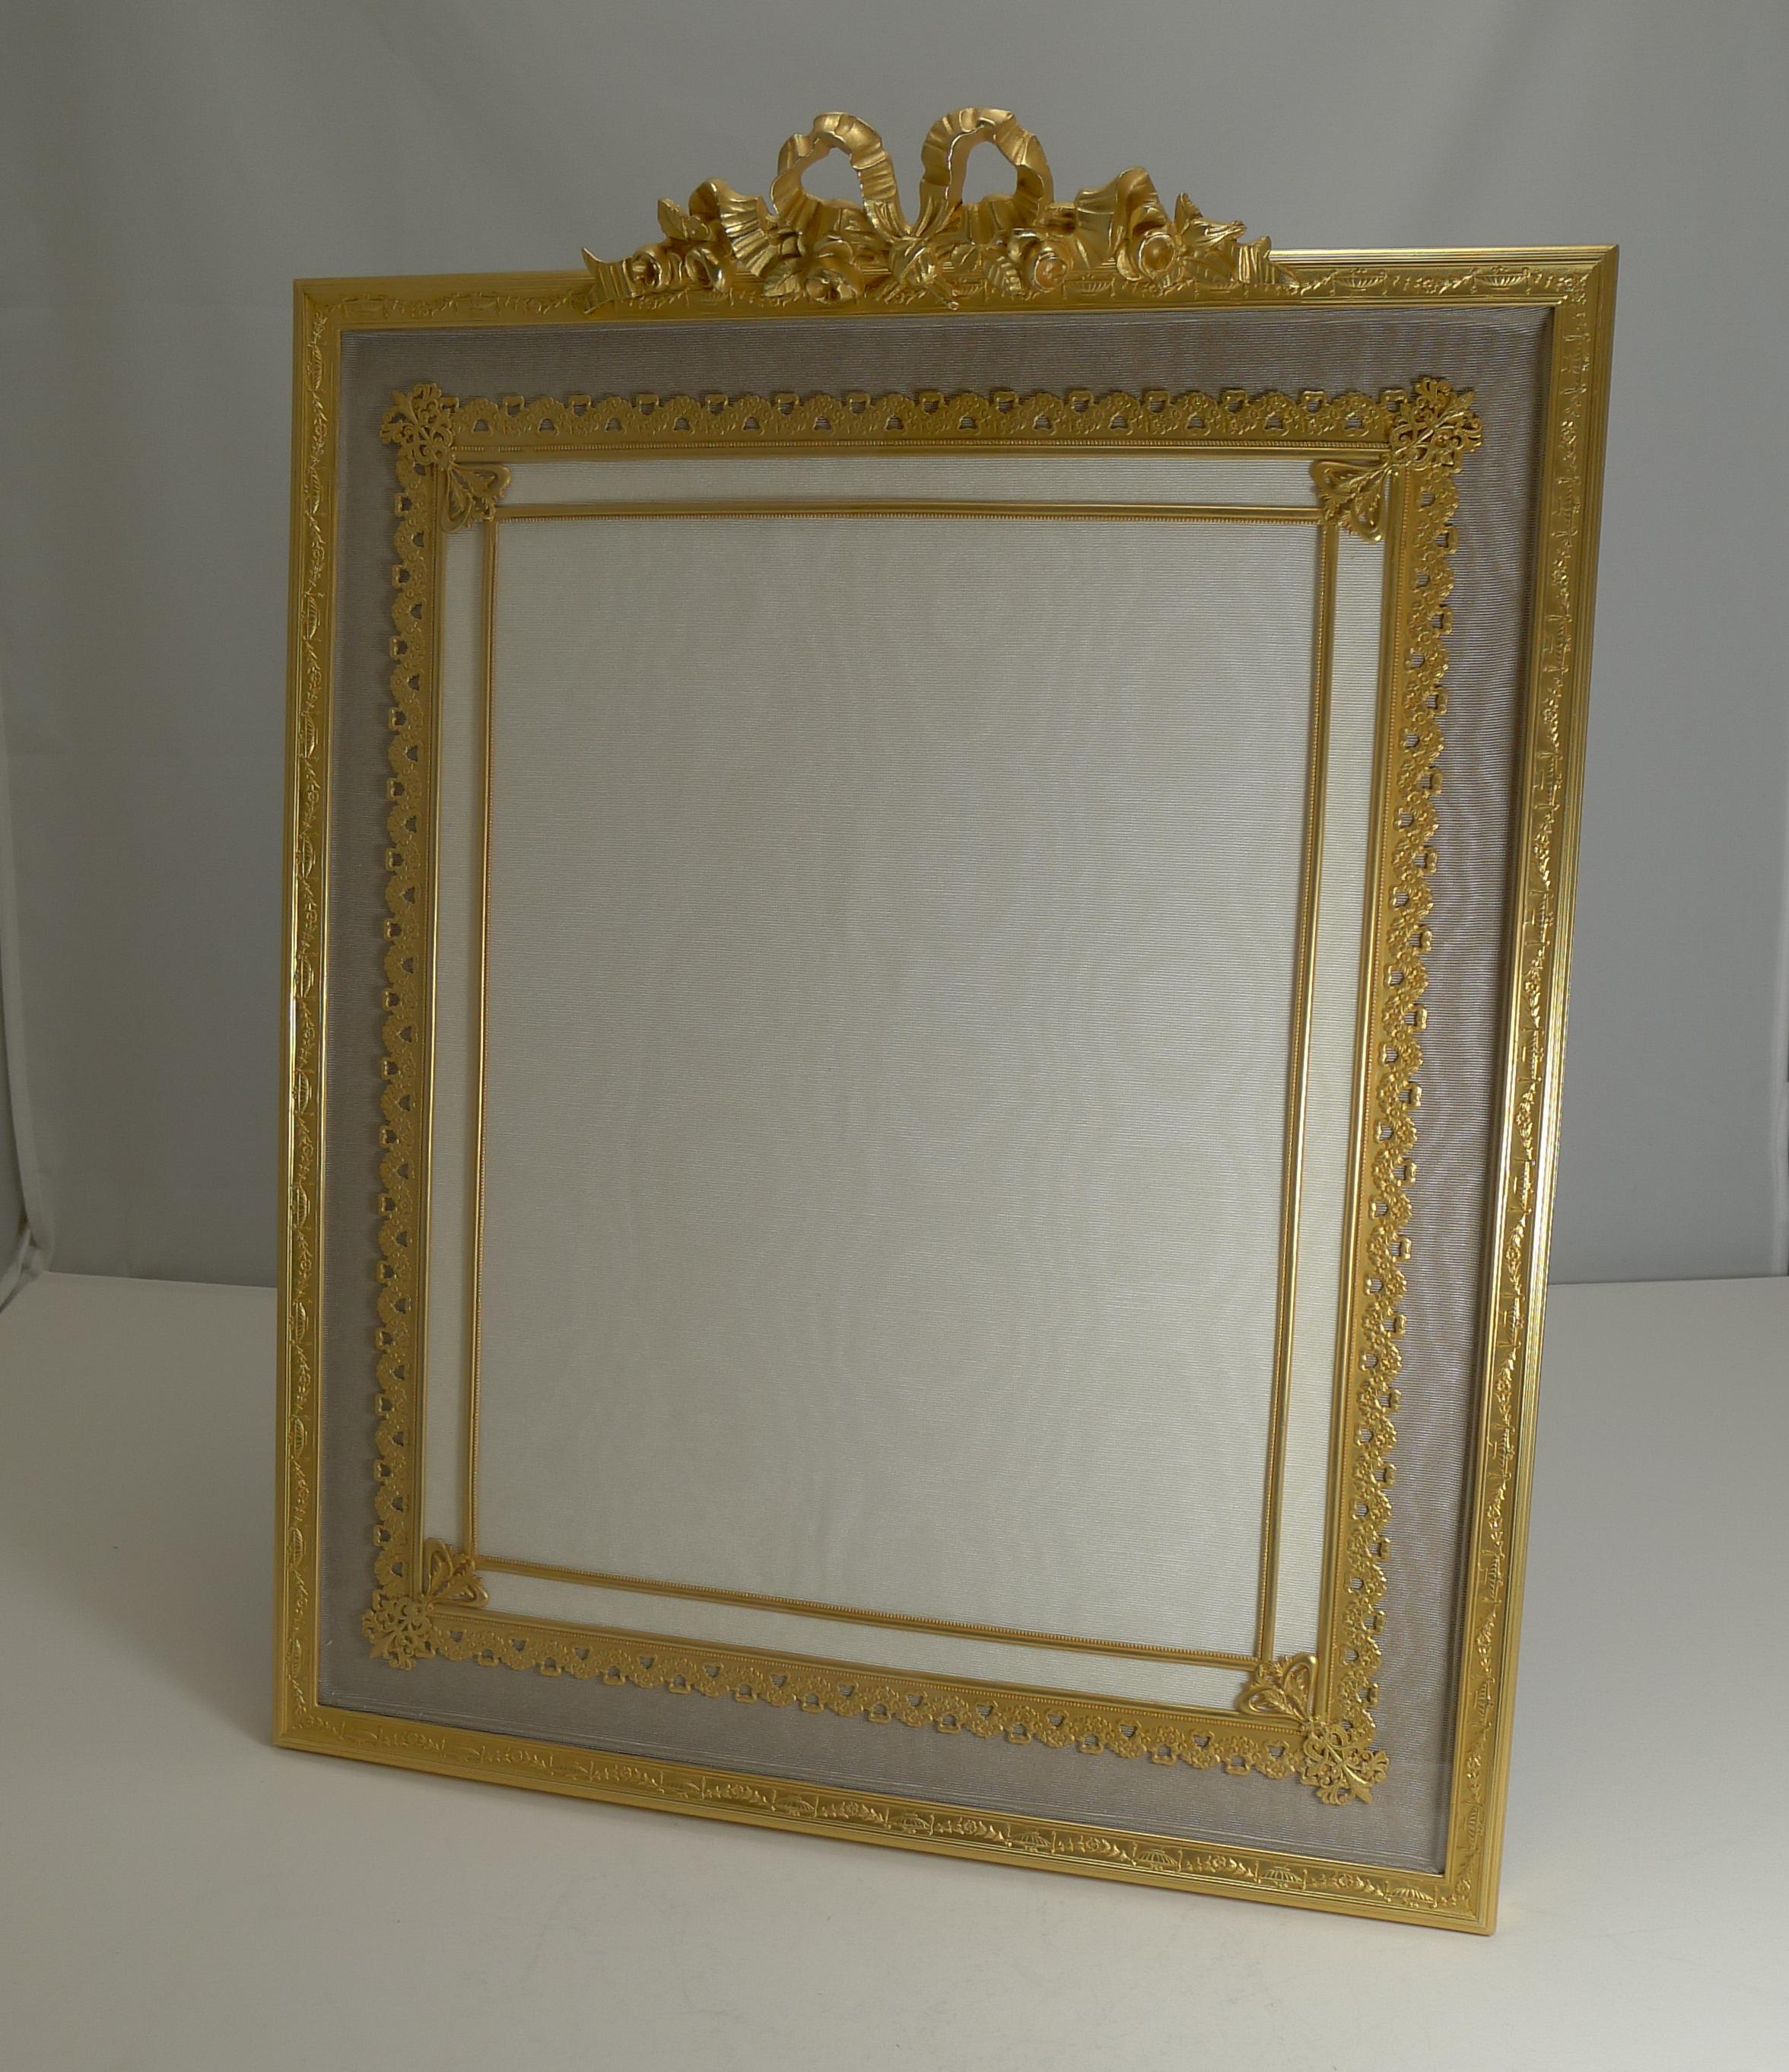 Gilt Grandest Antique French Gilded Bronze Photograph / Picture Frame, circa 1900